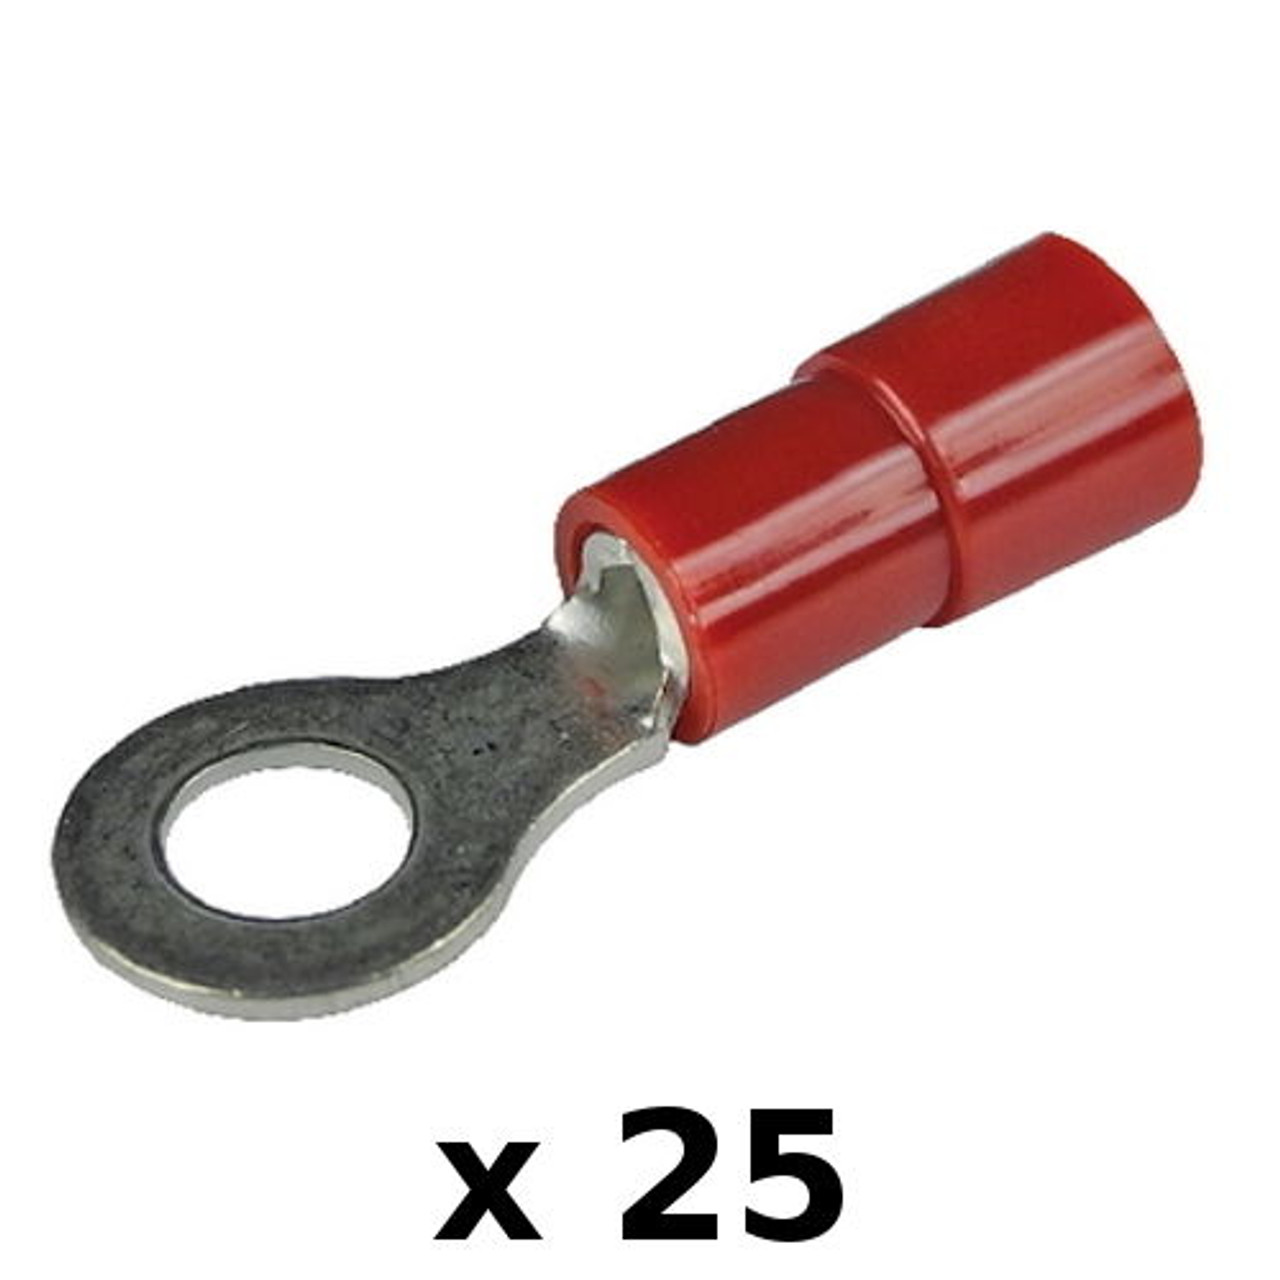 25 Pack Red 8 AWG Nylon Insulated 3/8 Inch Ring Terminals for Boats